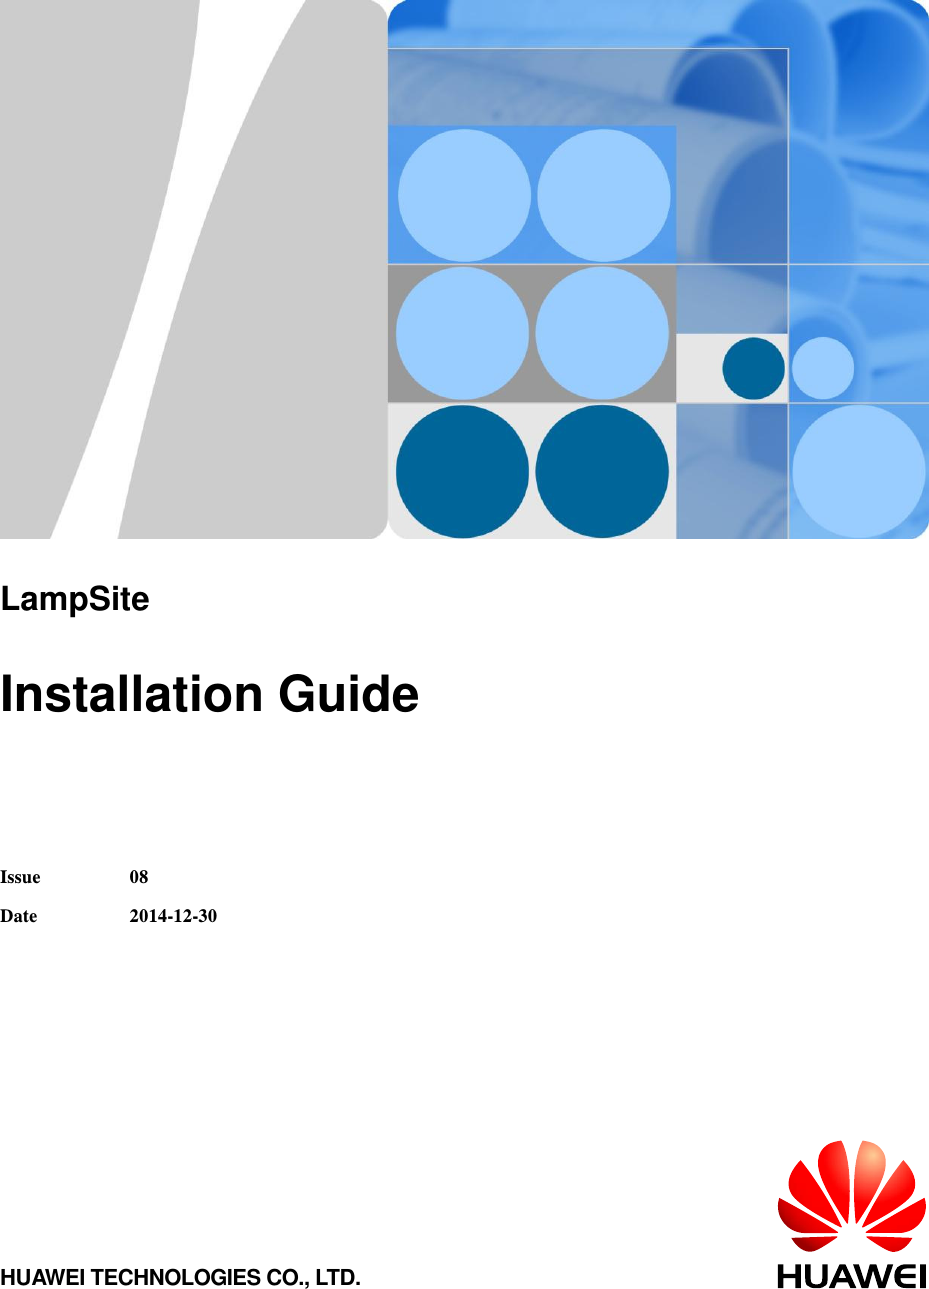         LampSite  Installation Guide   Issue 08 Date 2014-12-30 HUAWEI TECHNOLOGIES CO., LTD. 